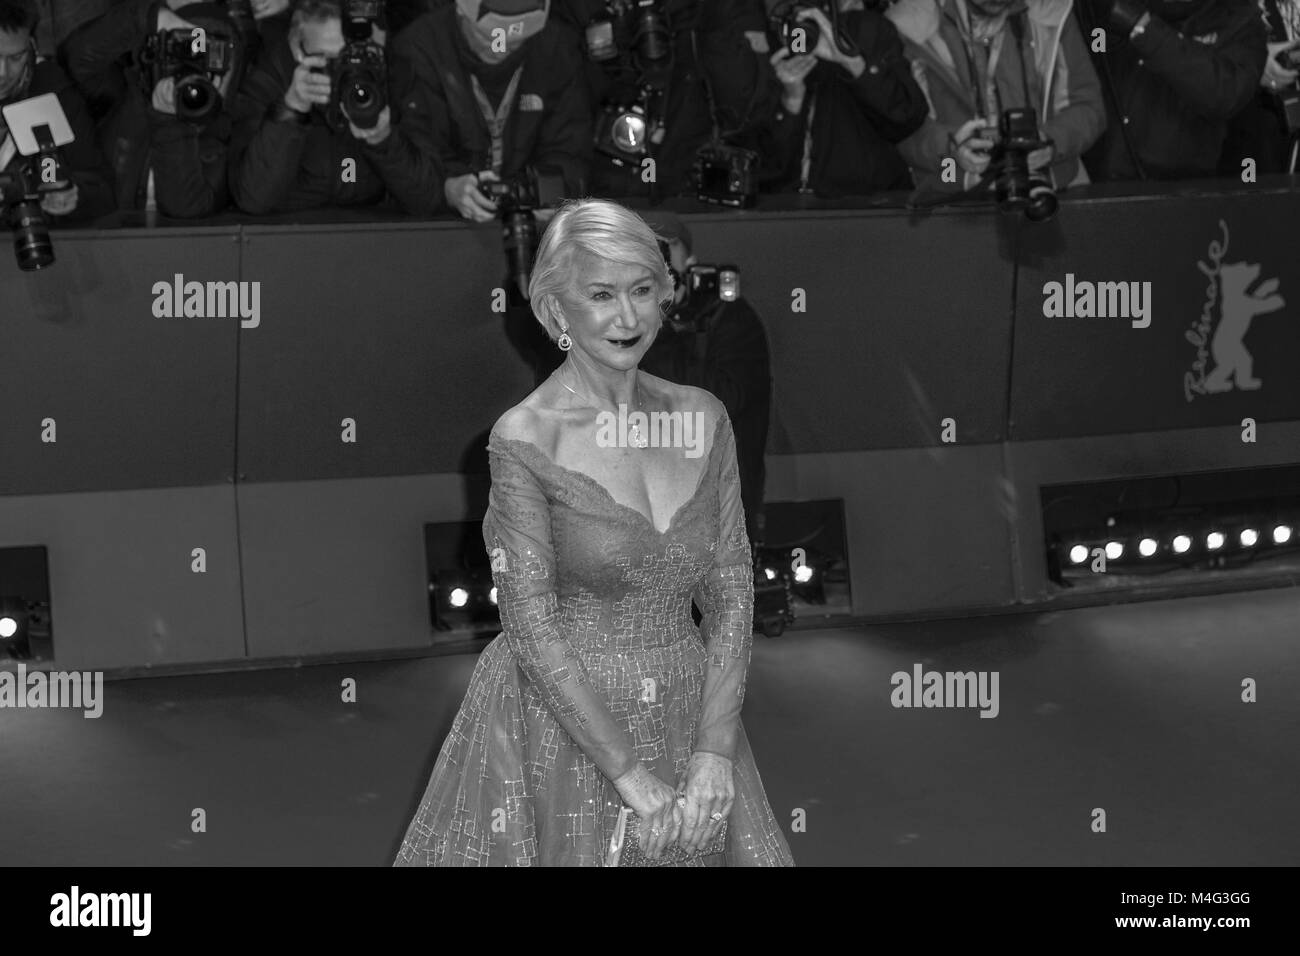 Berlin, Germany. 16th February, 2018. Helen Mirren at Berlinale for premiere 'Isle of Dogs' on 15th of February 2018 in Berlin Credit: Stefan Papp/Alamy Live News Stock Photo